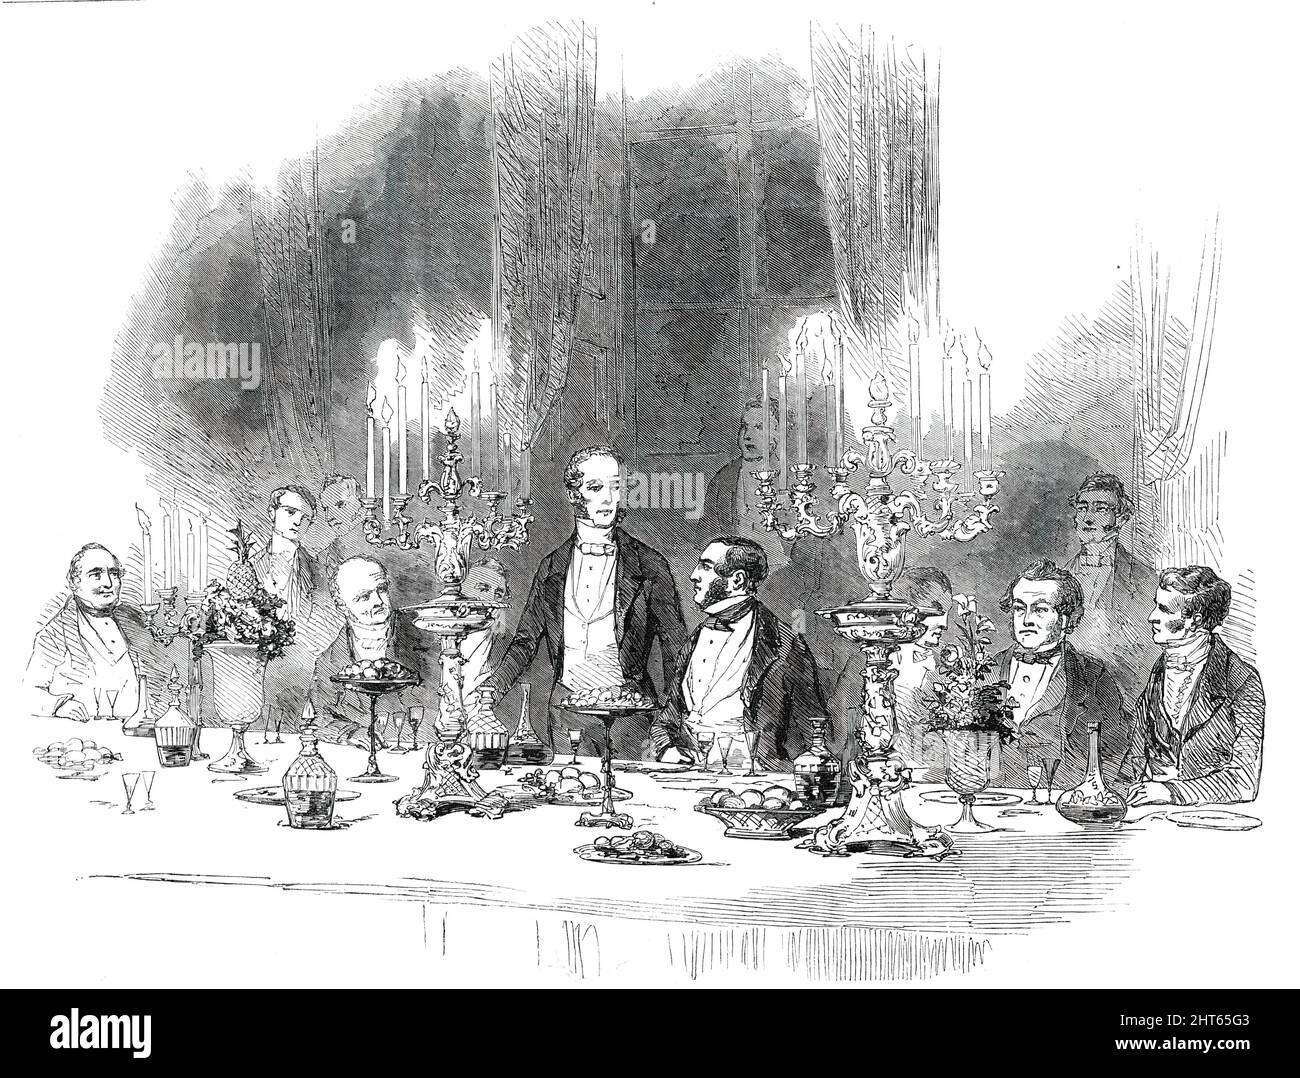 Grand Banquet to Viscount Palmerston by the Reform Club, [London], 1850. Dinner in honour of the Secretary of State for Foreign Affairs. 'It is to be regretted that the committee, in making their arrangements for the number to be present at the banquet, did not include proper accommodation, according to the usual custom on such occasions, for the representatives of the press. Some of the leading morning journals very properly declined sending any gentlemen connected with their establishments to report the proceedings, in consequence of the ill-advised and very ill-bred resolve of the committee Stock Photo